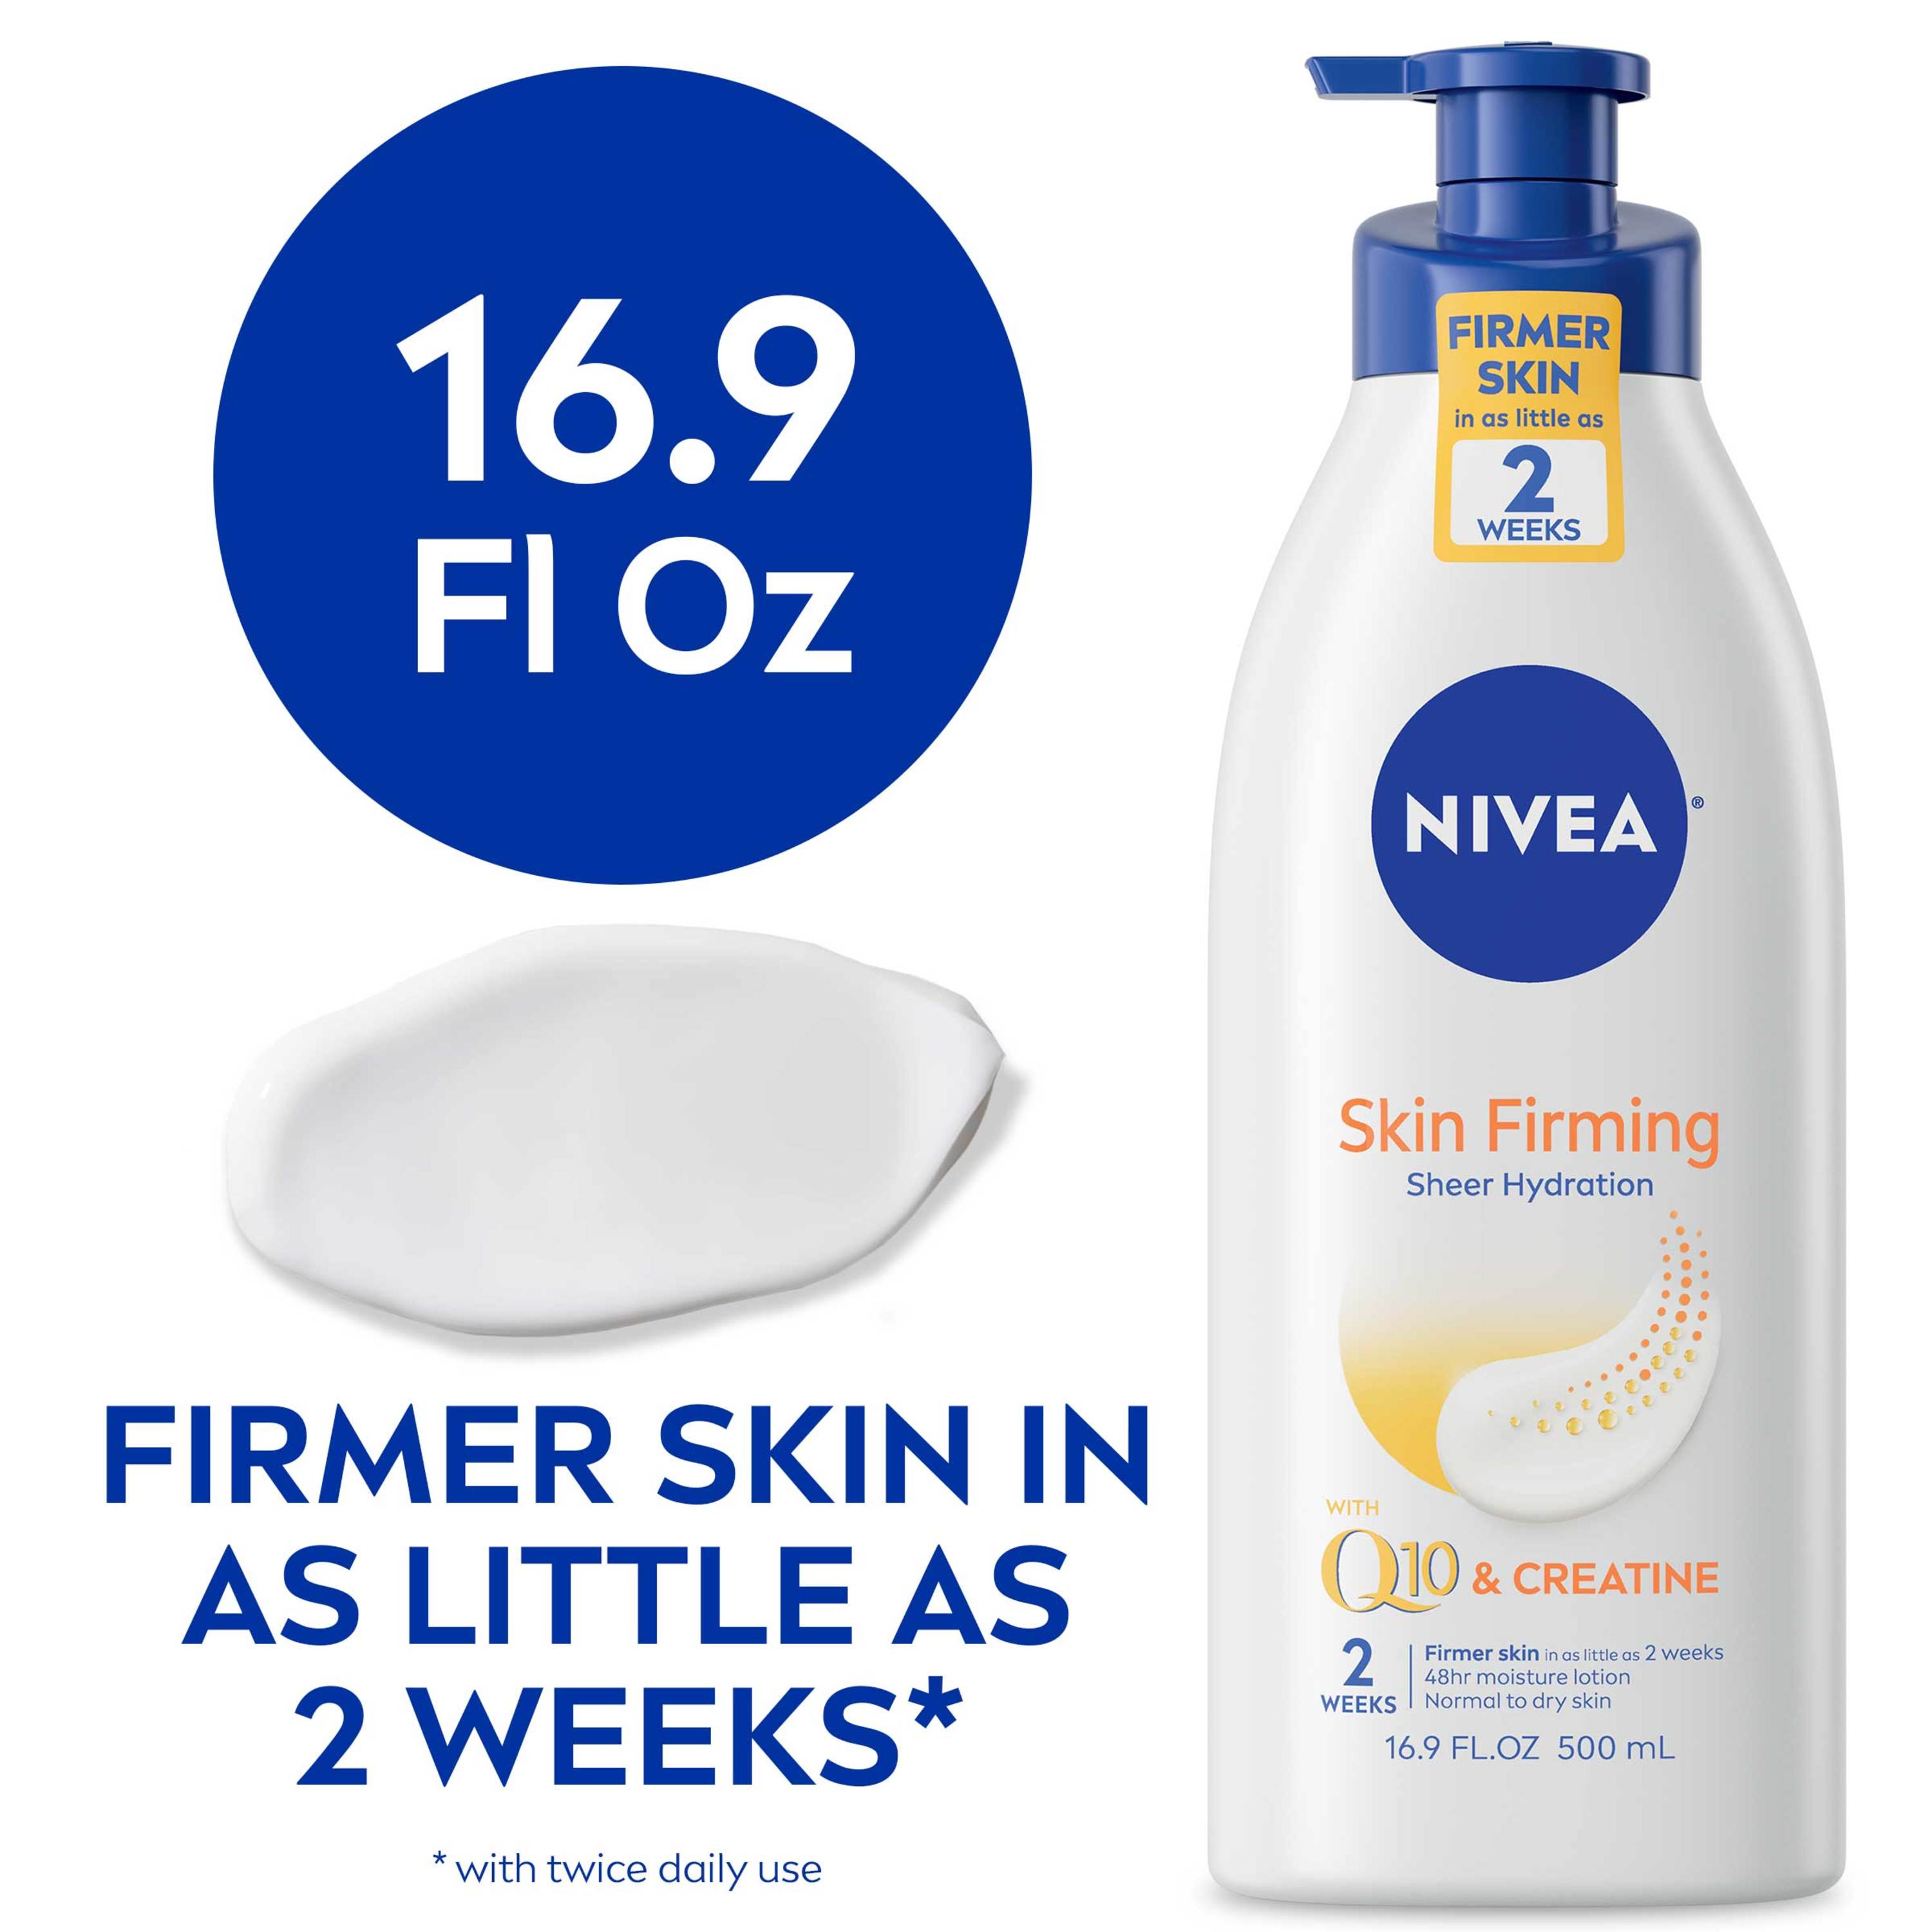 NIVEA Skin Firming Hydration Body Lotion with Q10 and Shea Butter, 16.9 Fl Oz Pump Bottle - image 1 of 13